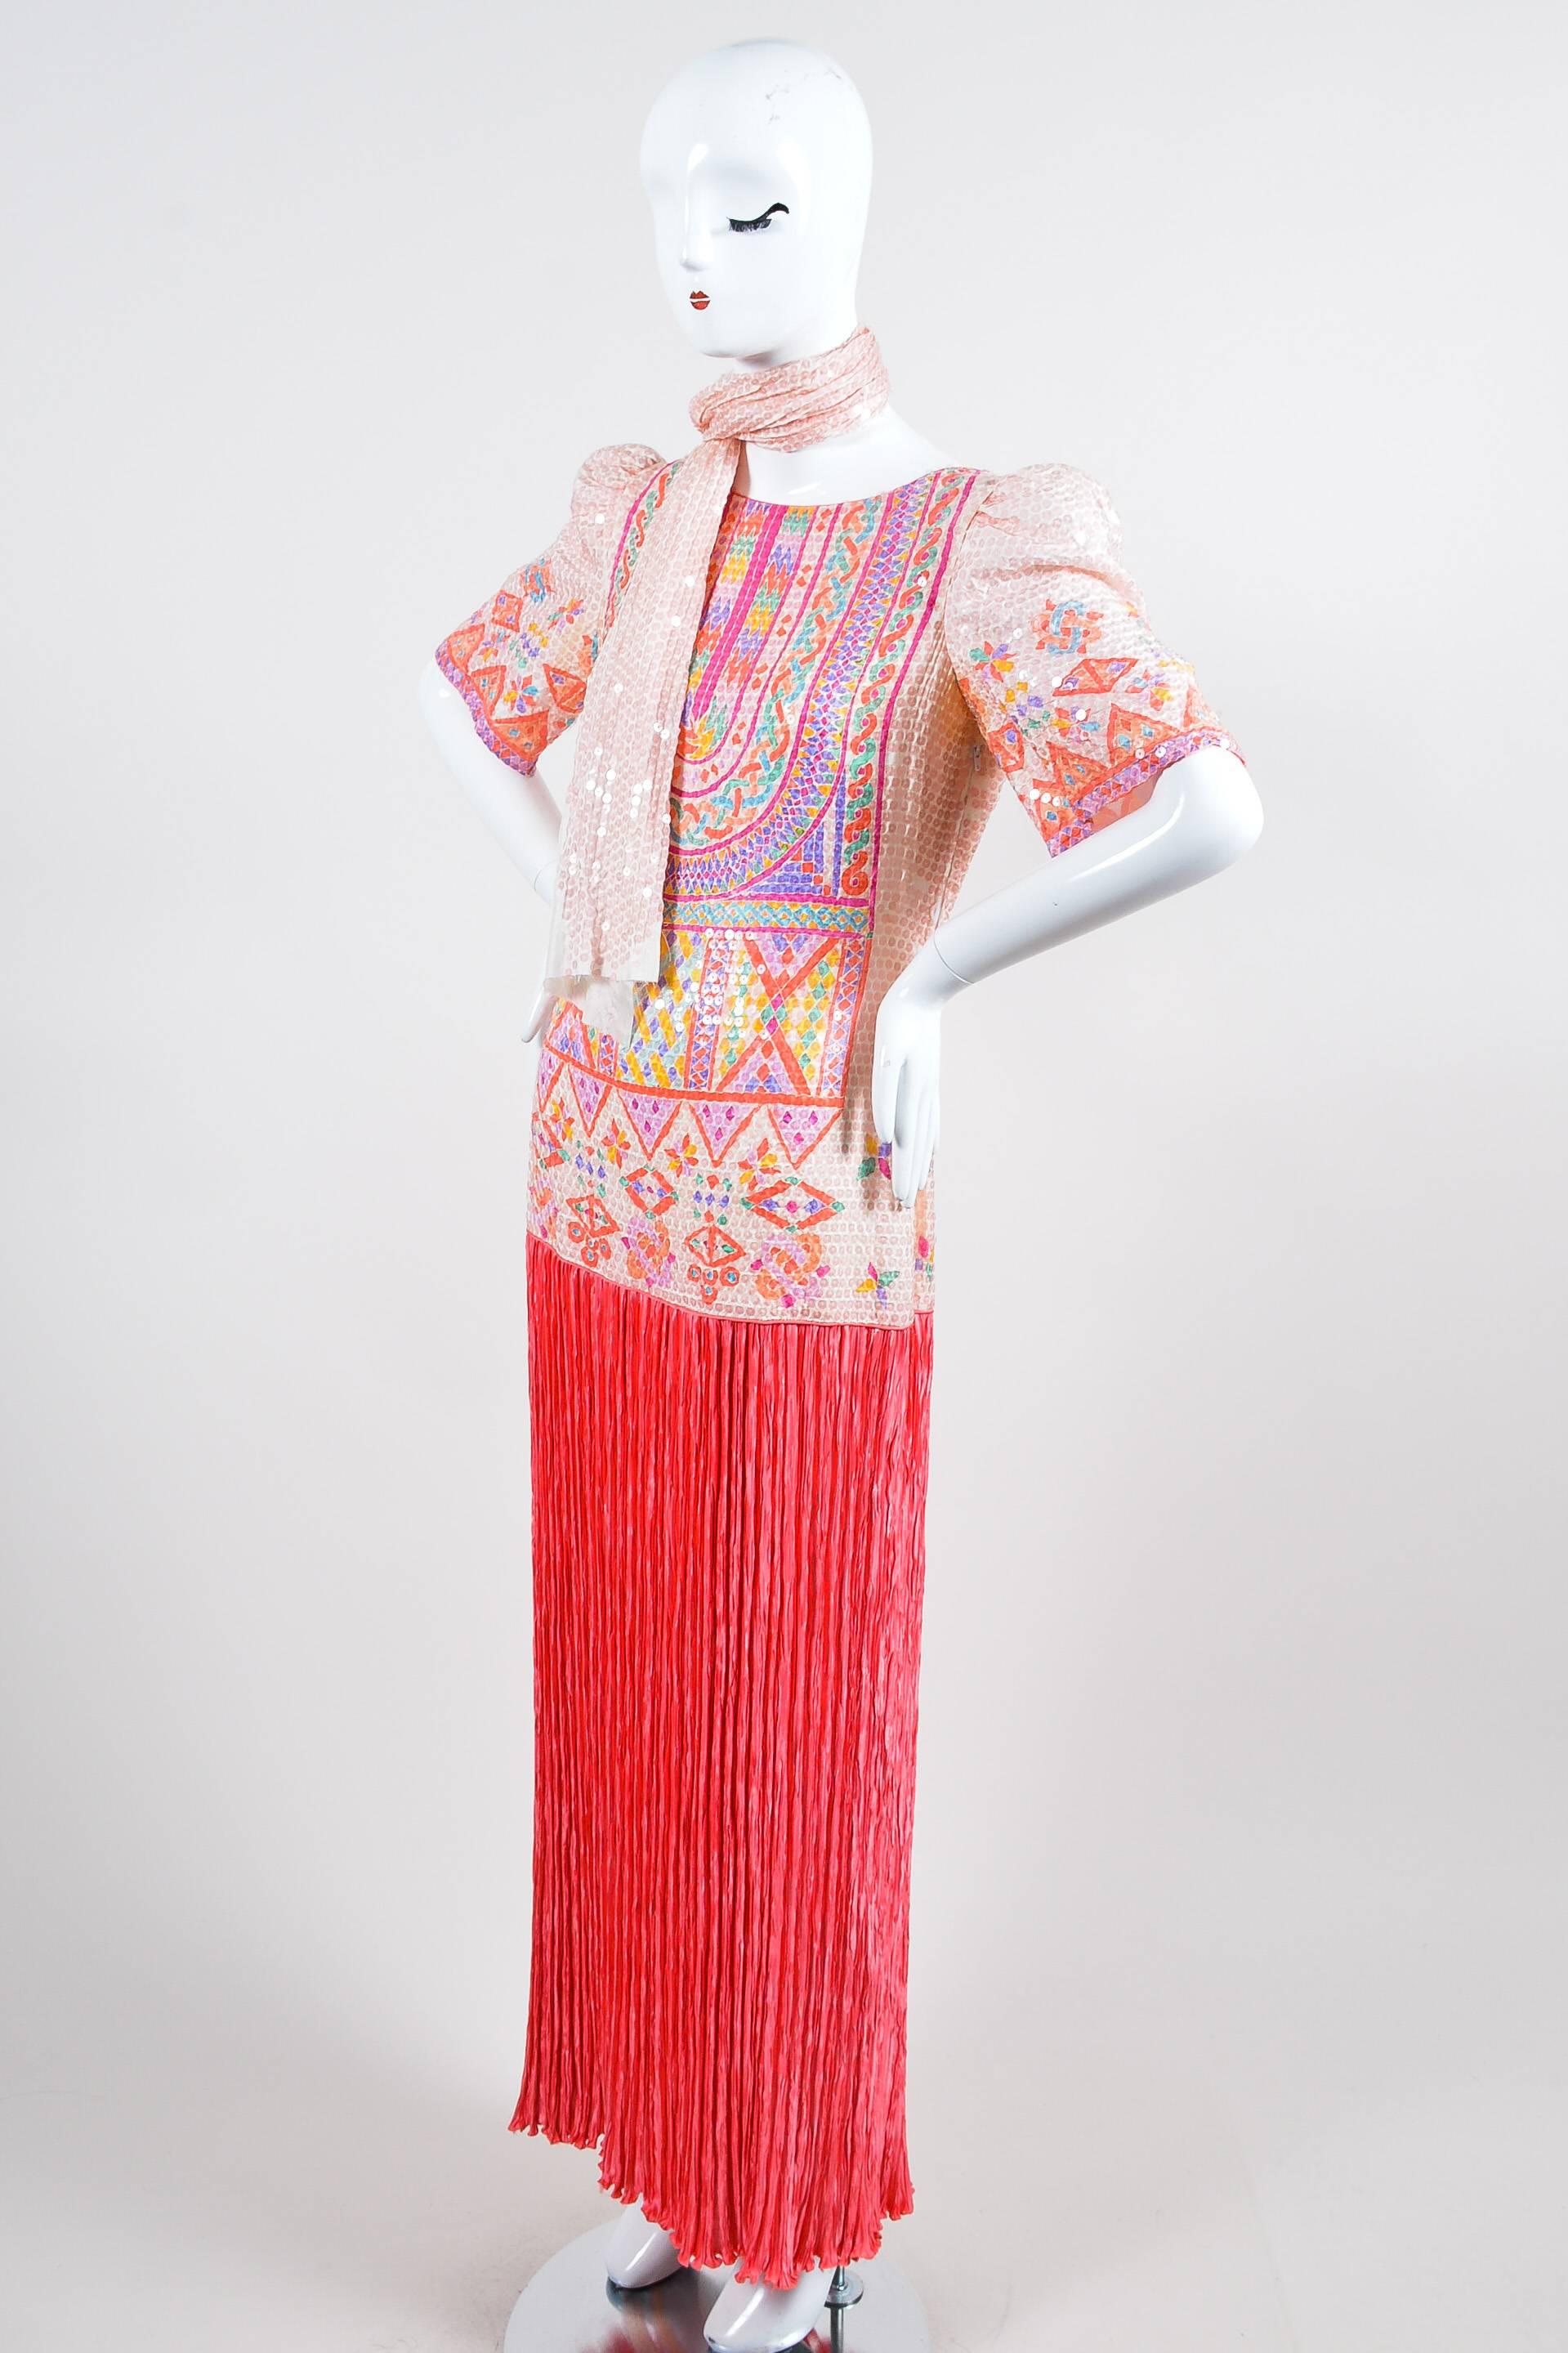 Bright and colorful vintage dress by Mary McFadden with allover sequin detailing. Coral, pink, purple, blue, yellow, and green pops throughout the geometric pattern. Micro pleated bottom in a deeper pink shade. Round boatneck collar with pink